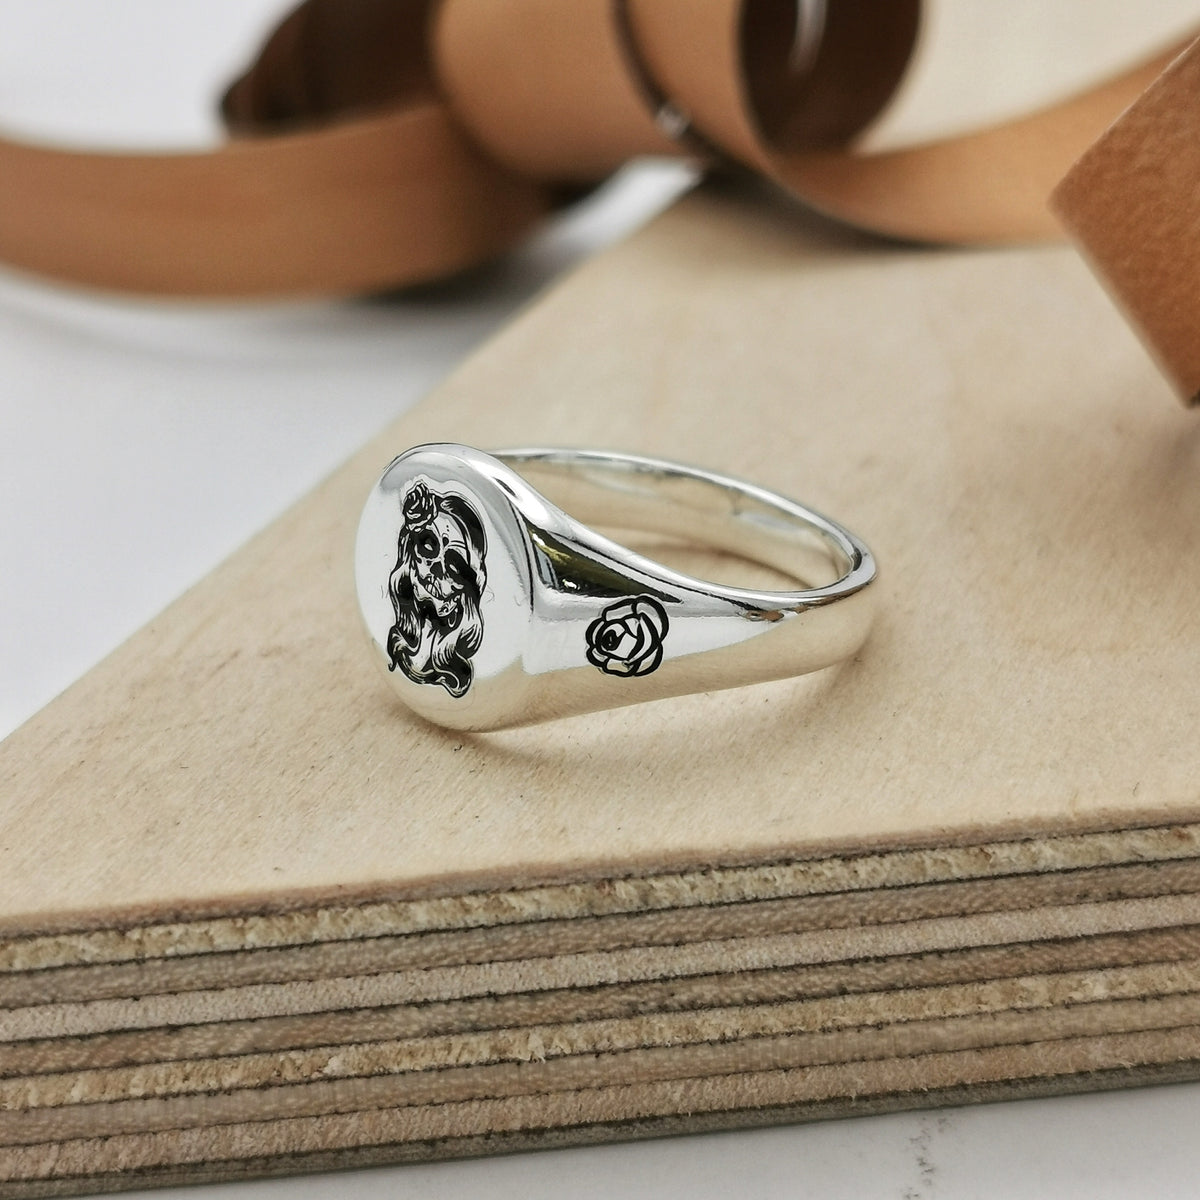 cusotm engraved rose day of the dead tattoo signet ring 